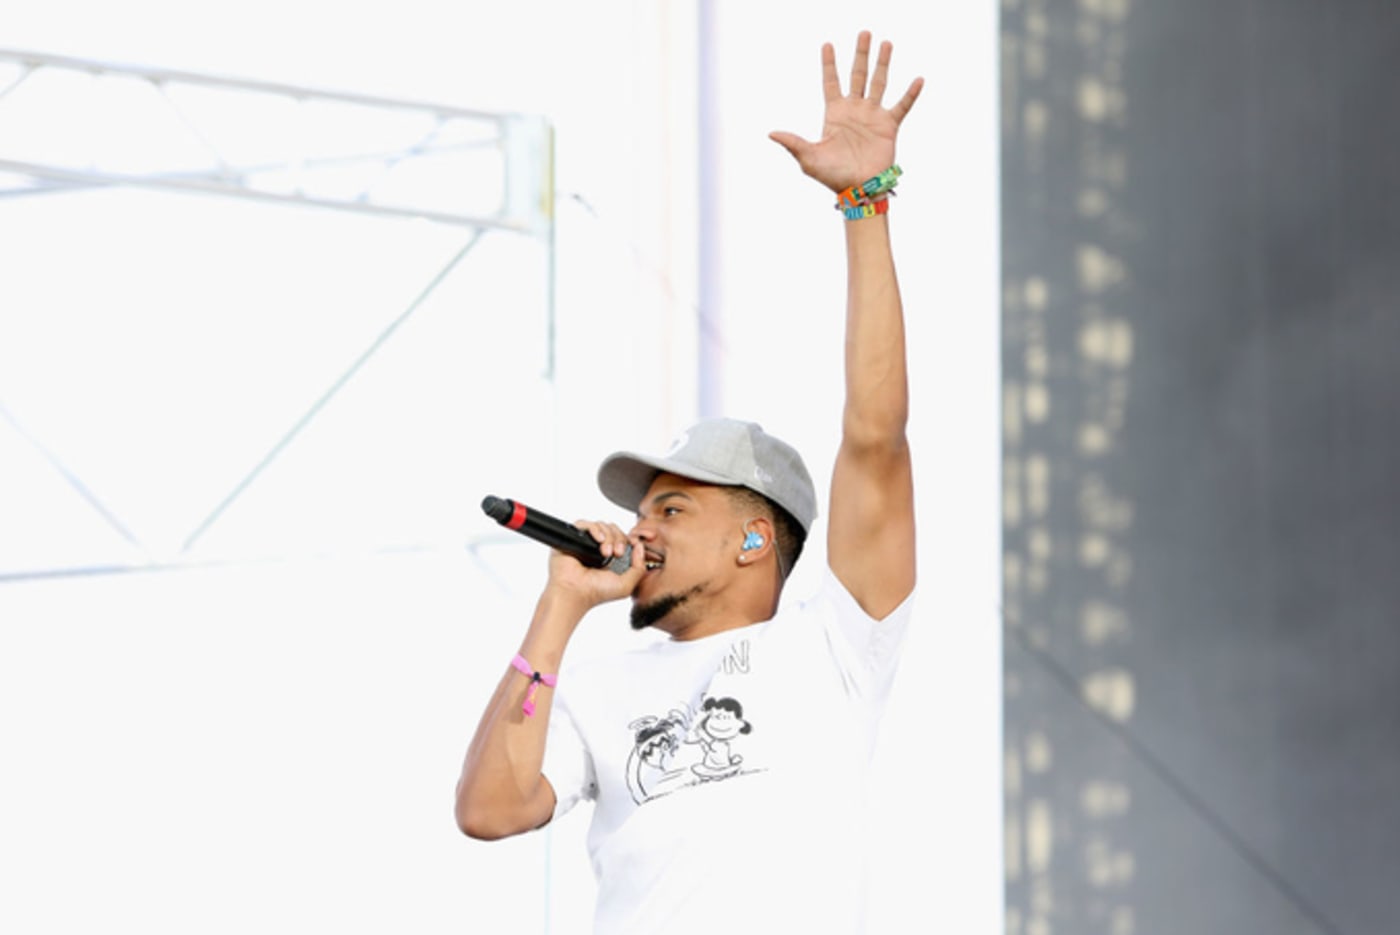 Chance The Rapper performs onstage during the 2018 Coachella